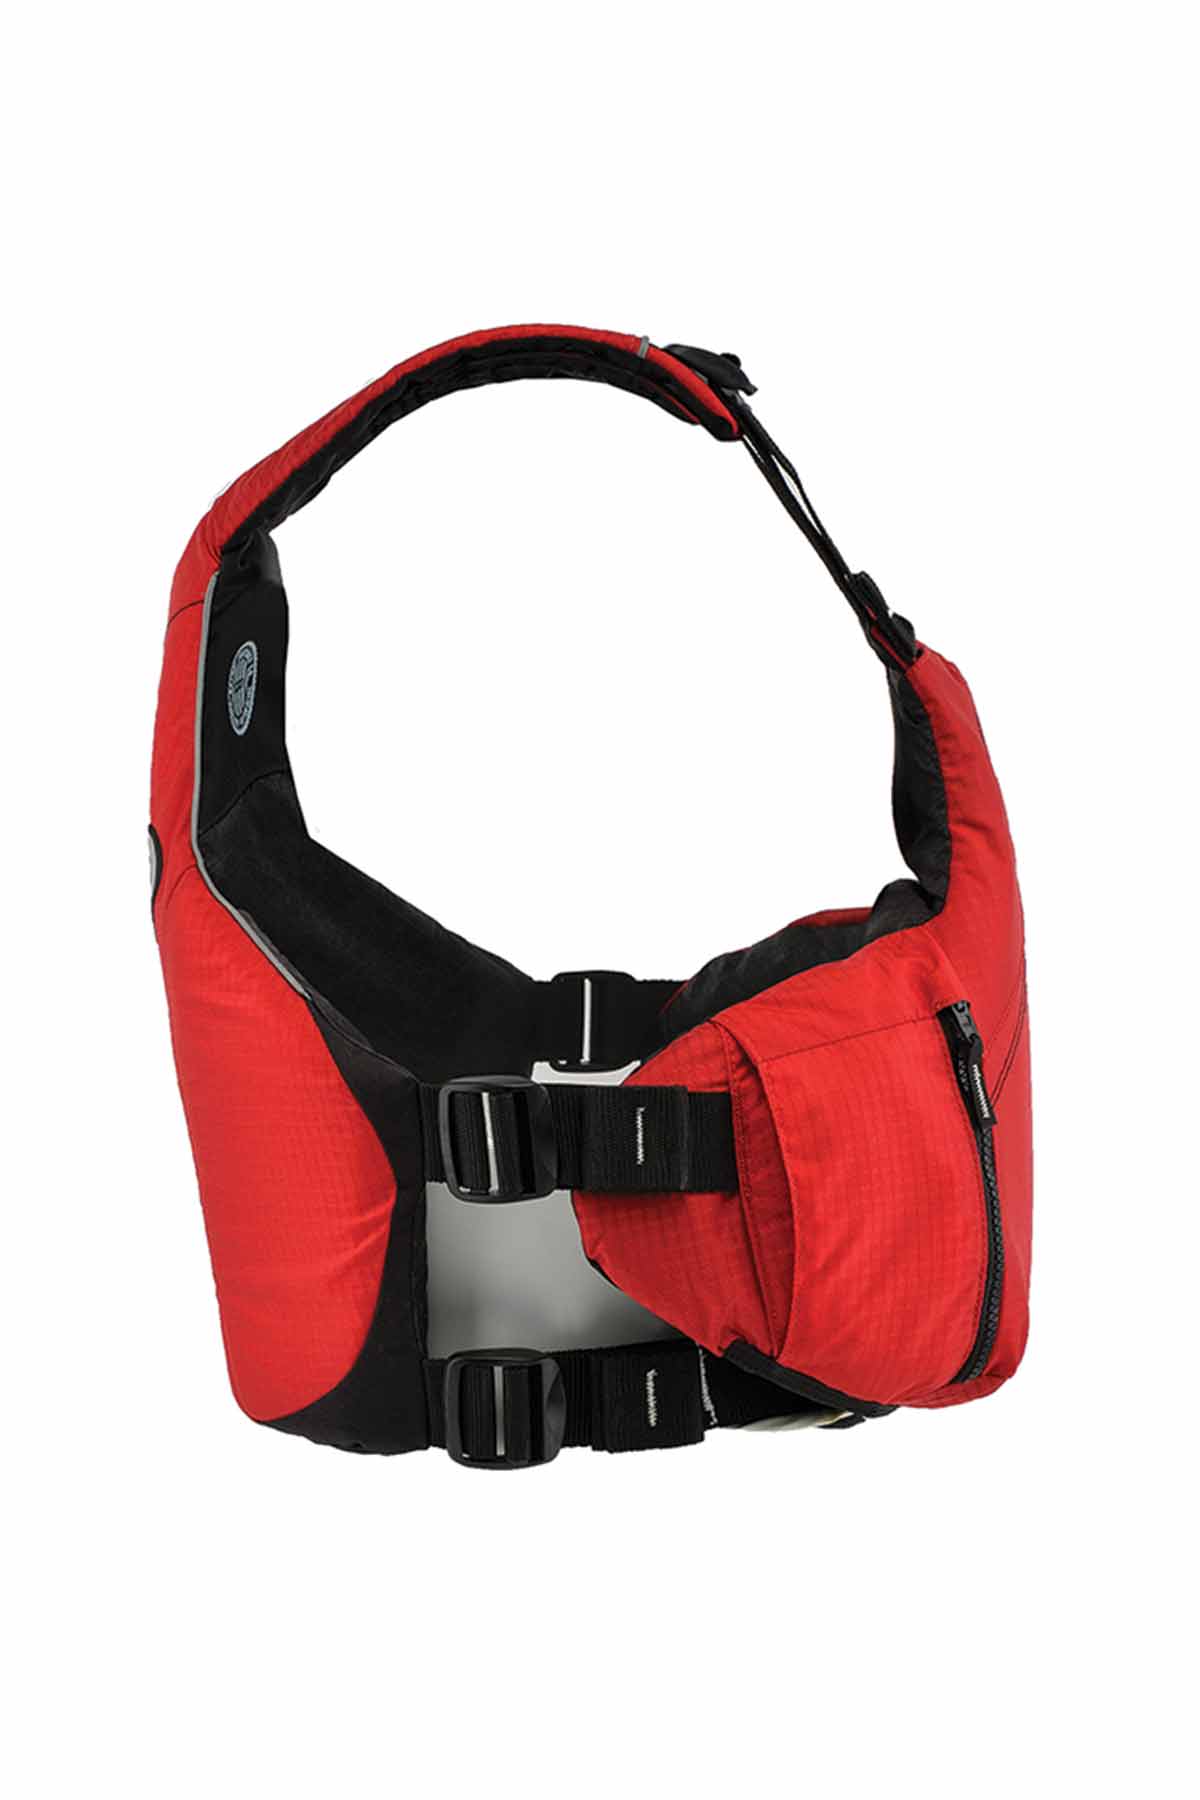 Astral Whitewater YTV PFD Cherry Creek Red Side View